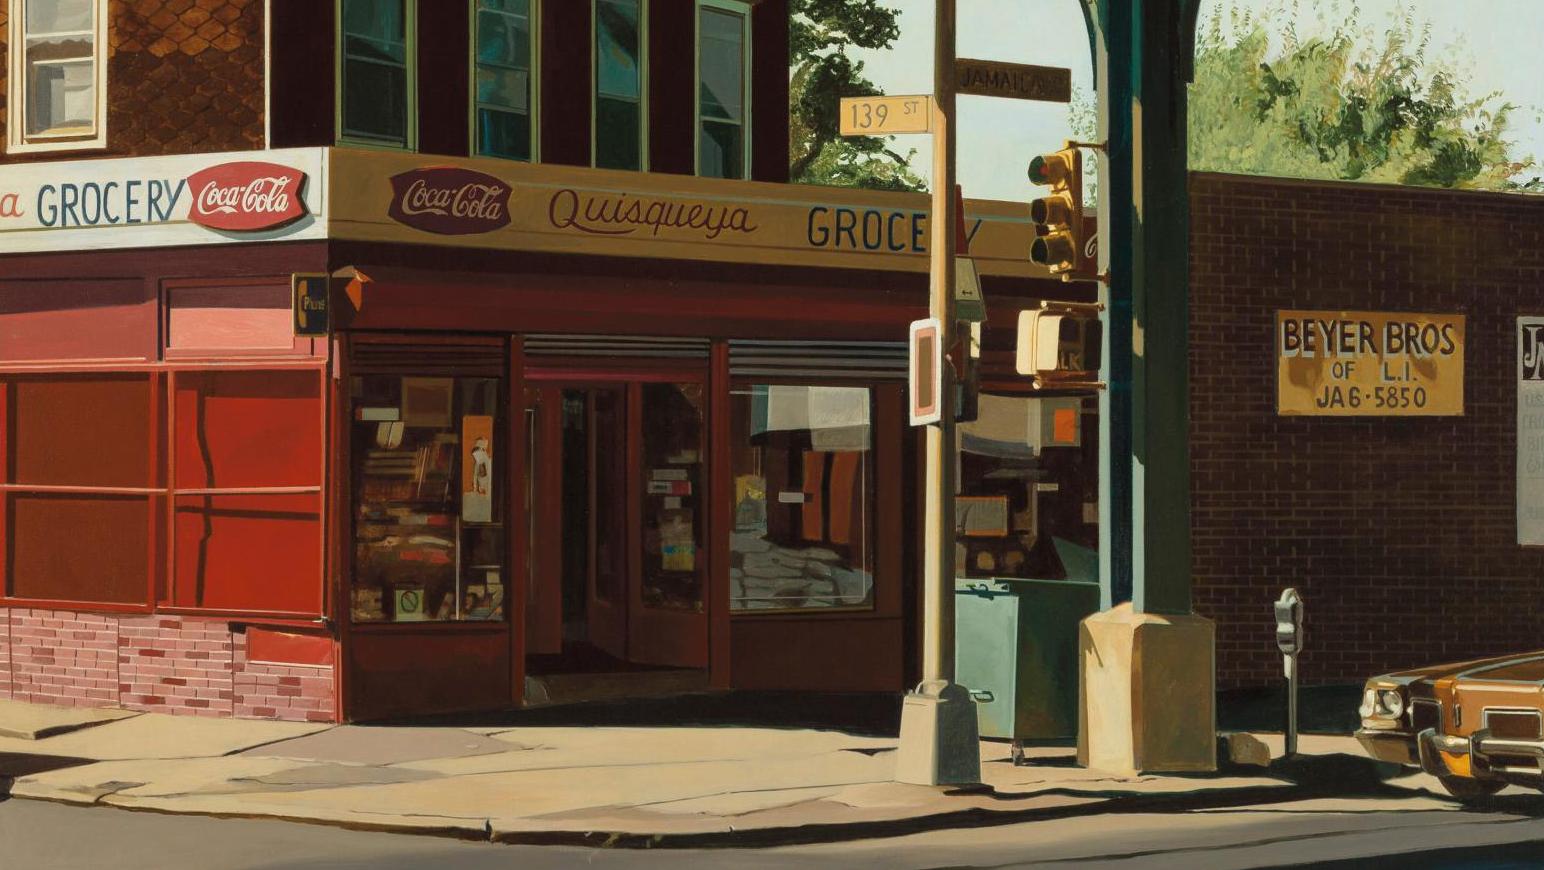 John Register (1939-1996), 139th St. Grocery, oil on canvas, 127 x 127 cm/50 x 50... The American Realism of John Register